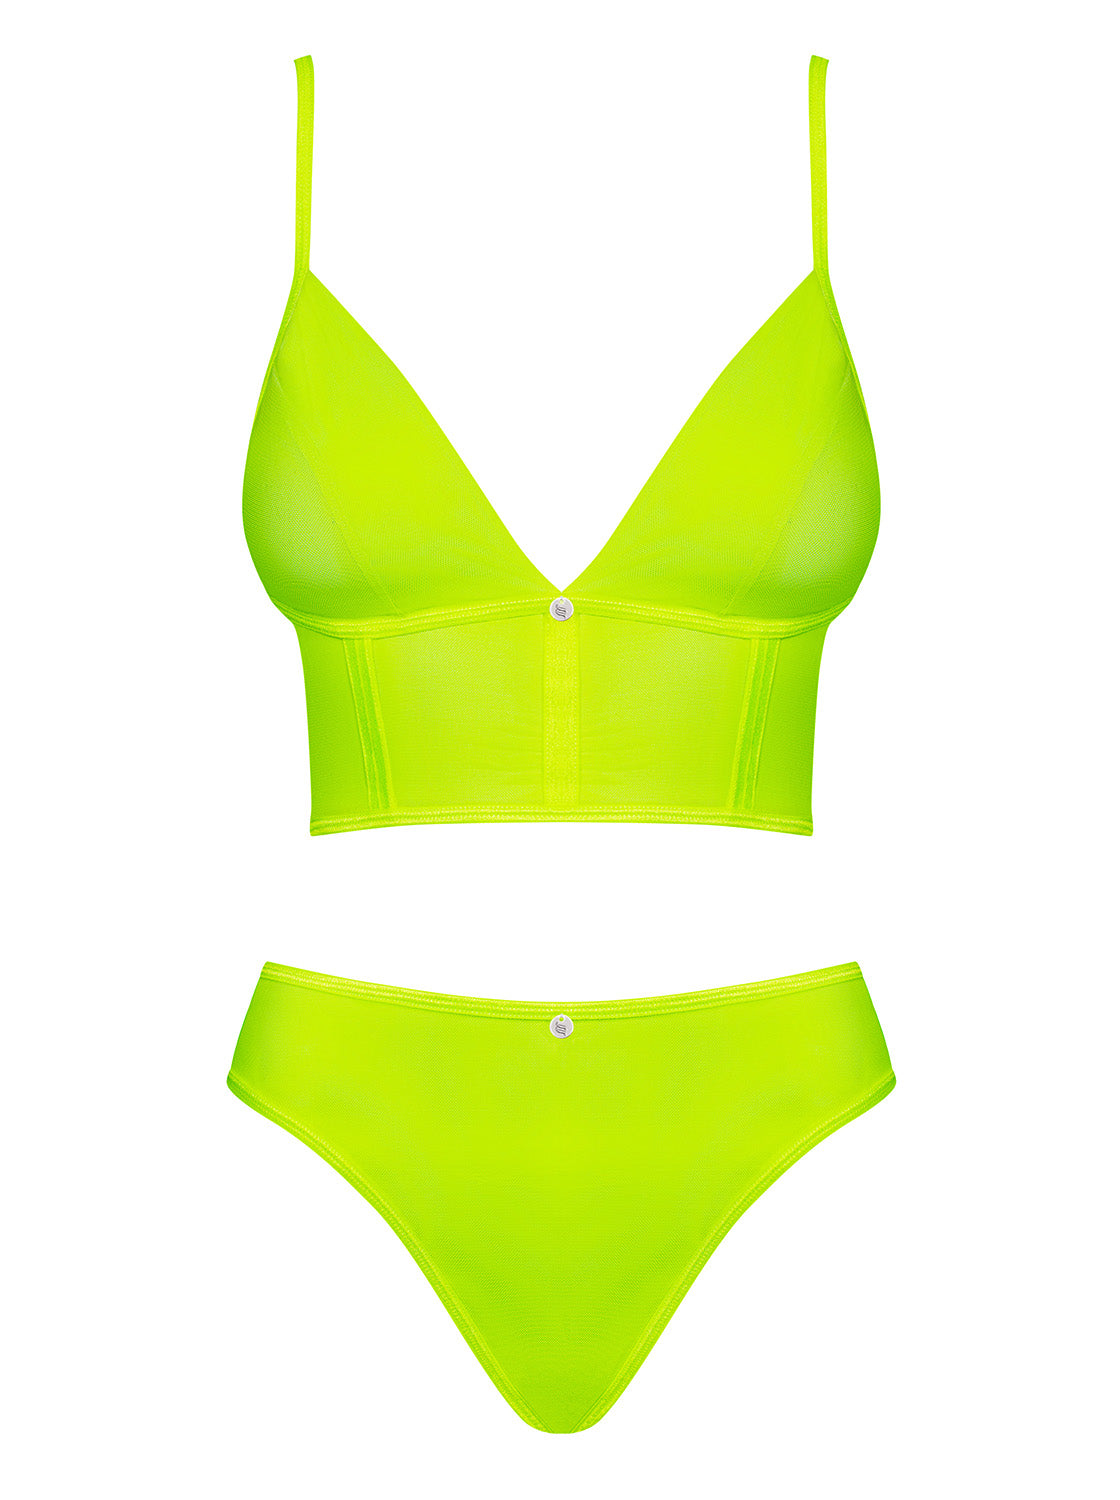 Neonia a seductive top in neon yellow with matching panties in a classic cut